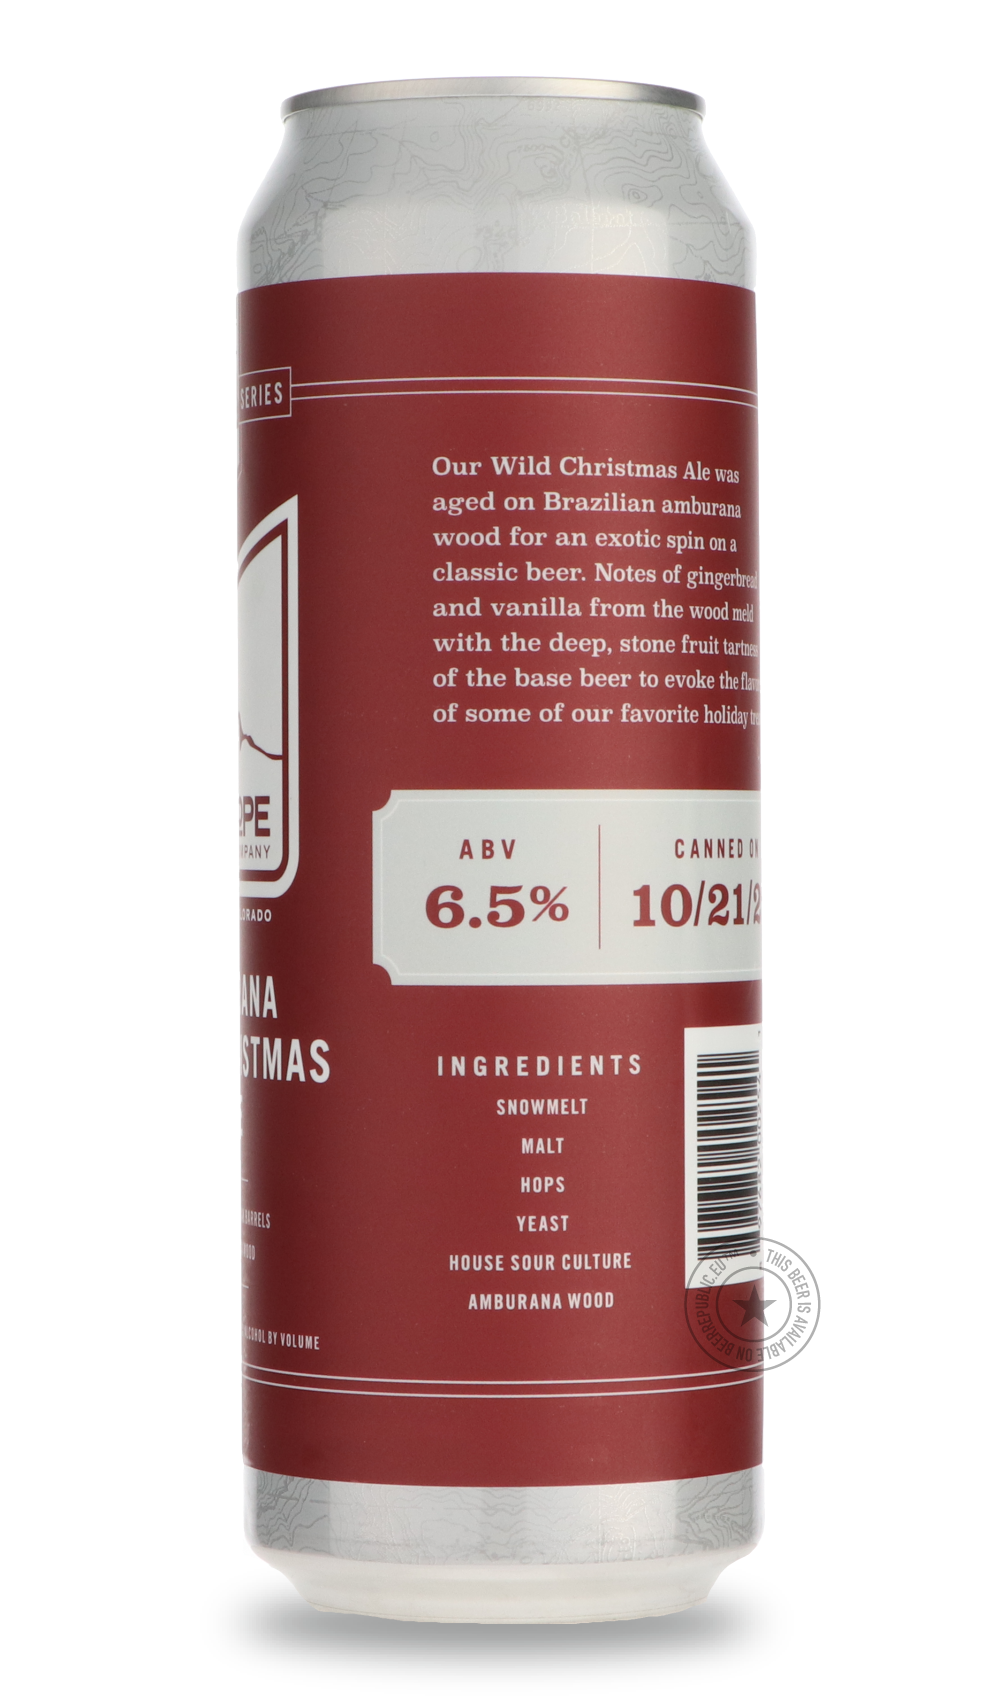 -Upslope- Lee Hill Vol. 34 Amburana Wild Christmas Ale-Sour / Wild & Fruity- Only @ Beer Republic - The best online beer store for American & Canadian craft beer - Buy beer online from the USA and Canada - Bier online kopen - Amerikaans bier kopen - Craft beer store - Craft beer kopen - Amerikanisch bier kaufen - Bier online kaufen - Acheter biere online - IPA - Stout - Porter - New England IPA - Hazy IPA - Imperial Stout - Barrel Aged - Barrel Aged Imperial Stout - Brown - Dark beer - Blond - Blonde - Pils